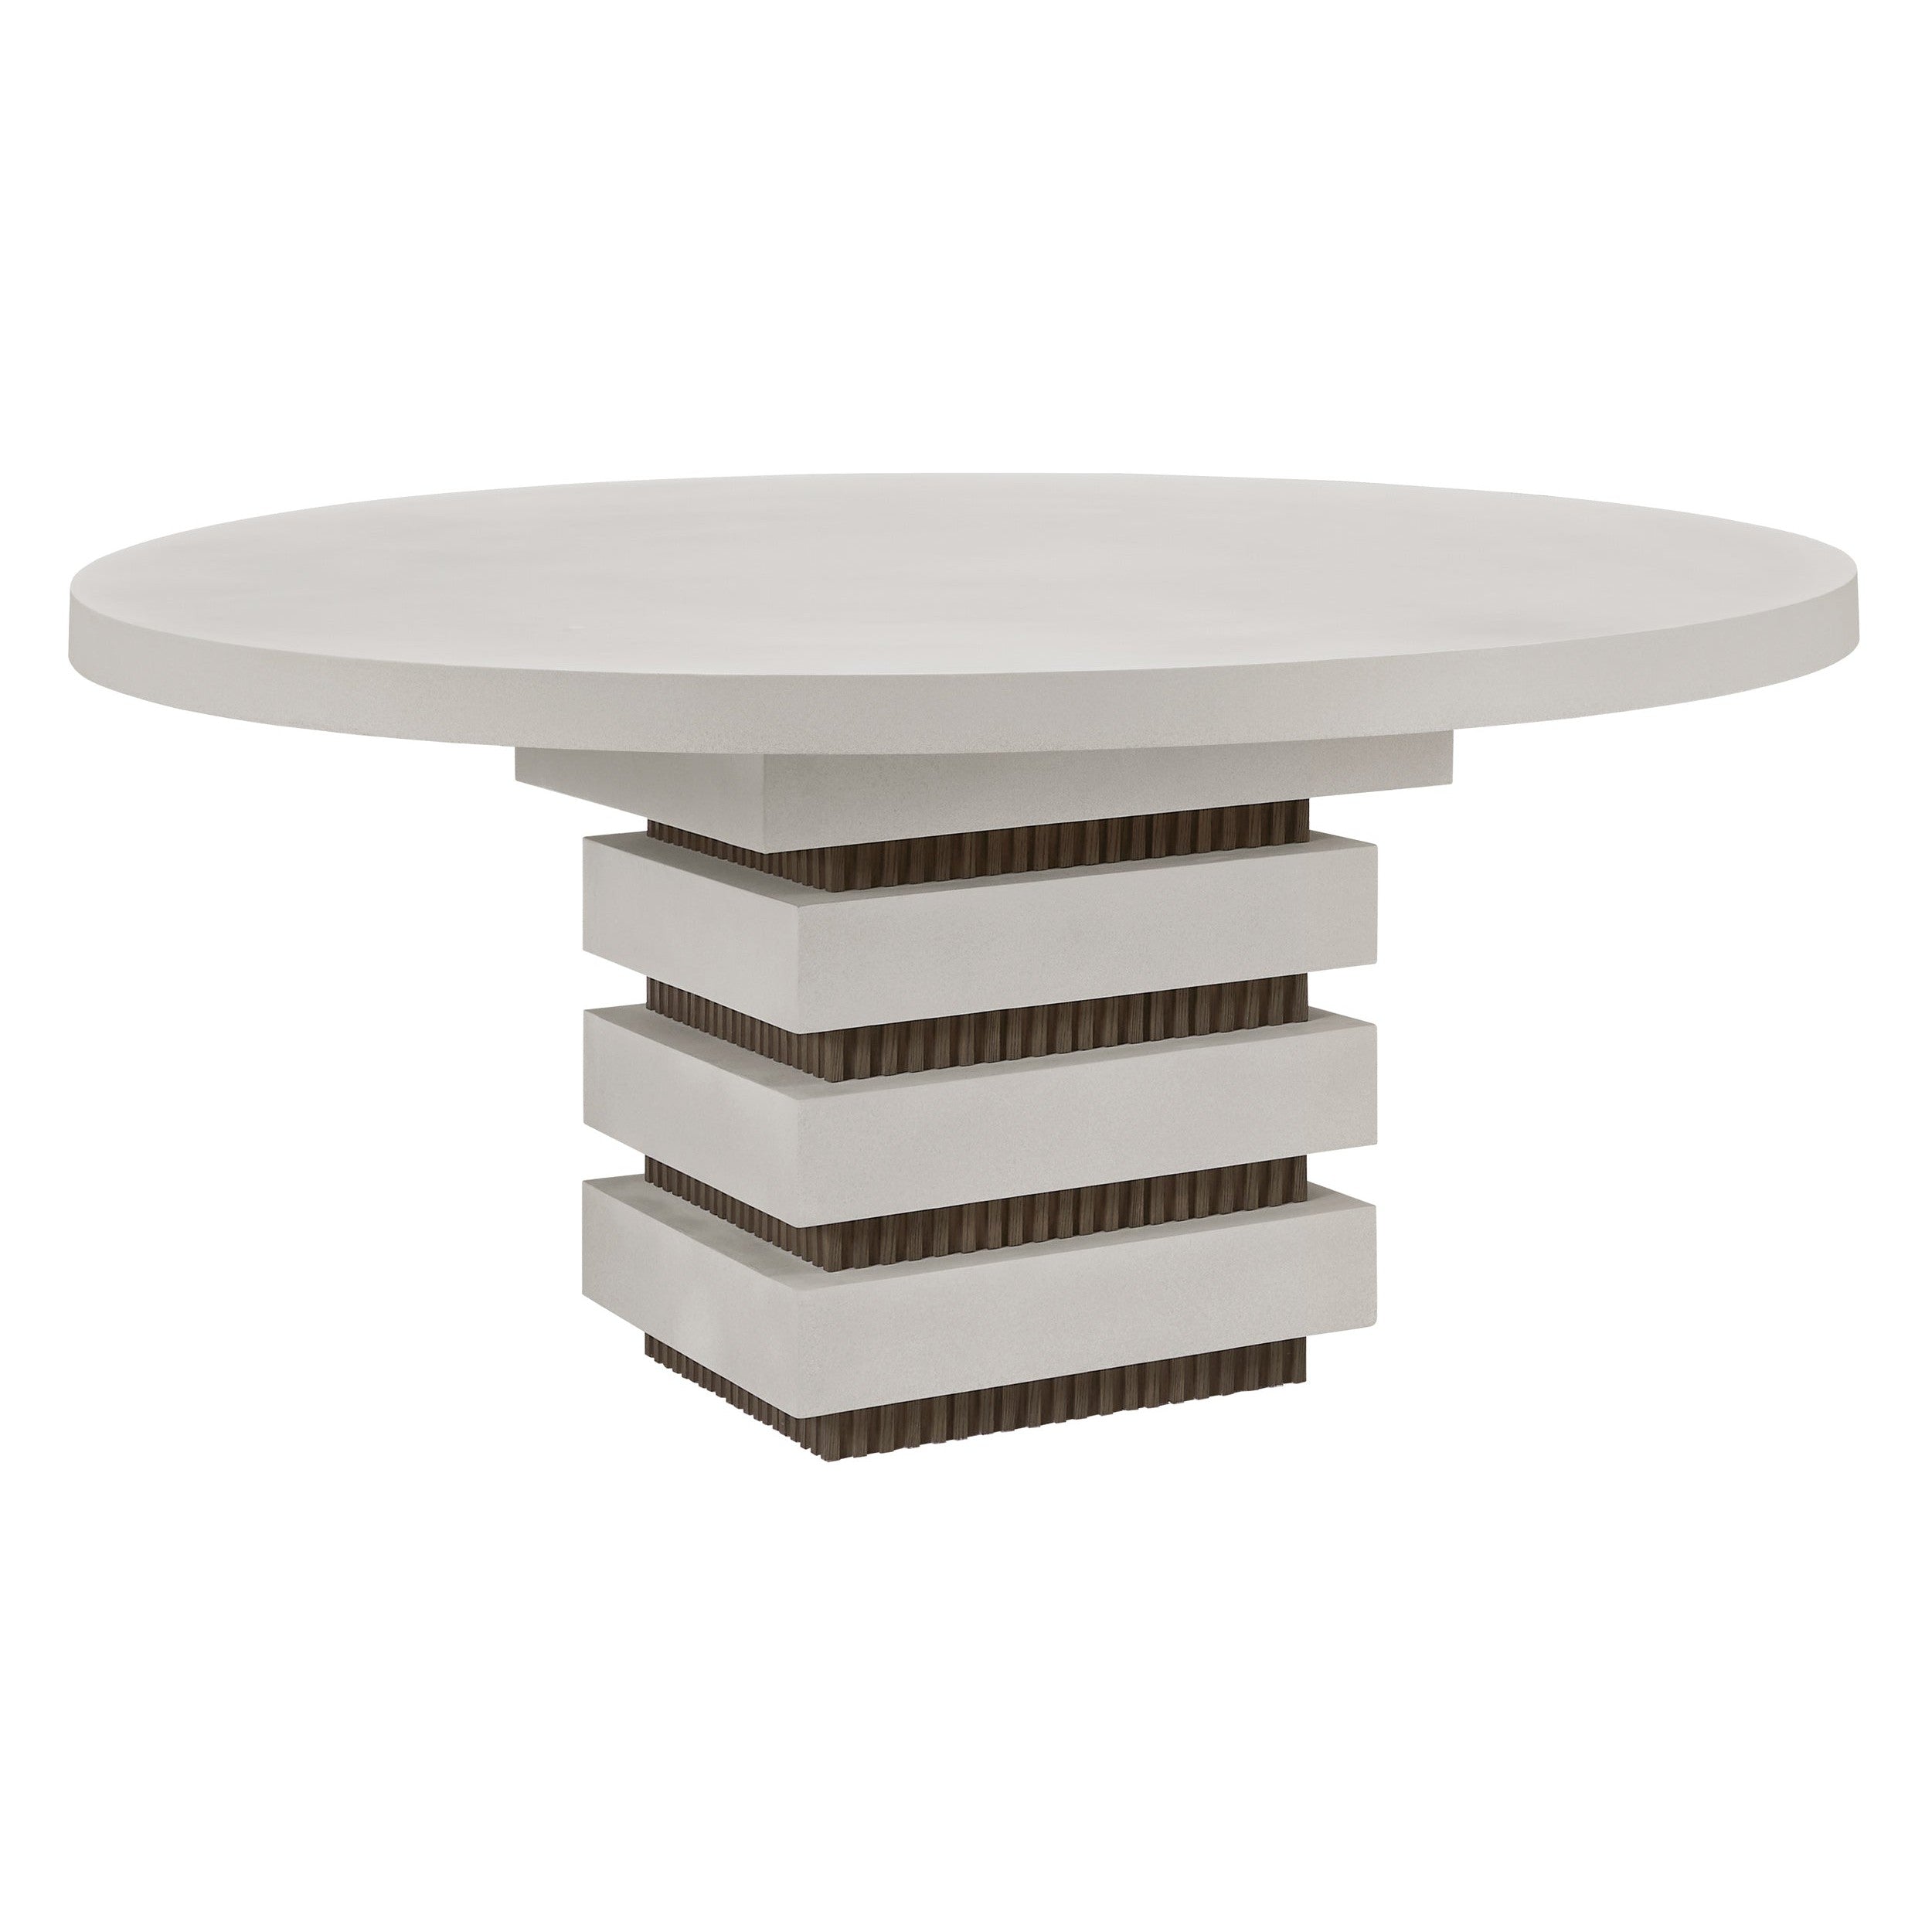 Meditation Round Dining Table - White Outdoor Dining Table